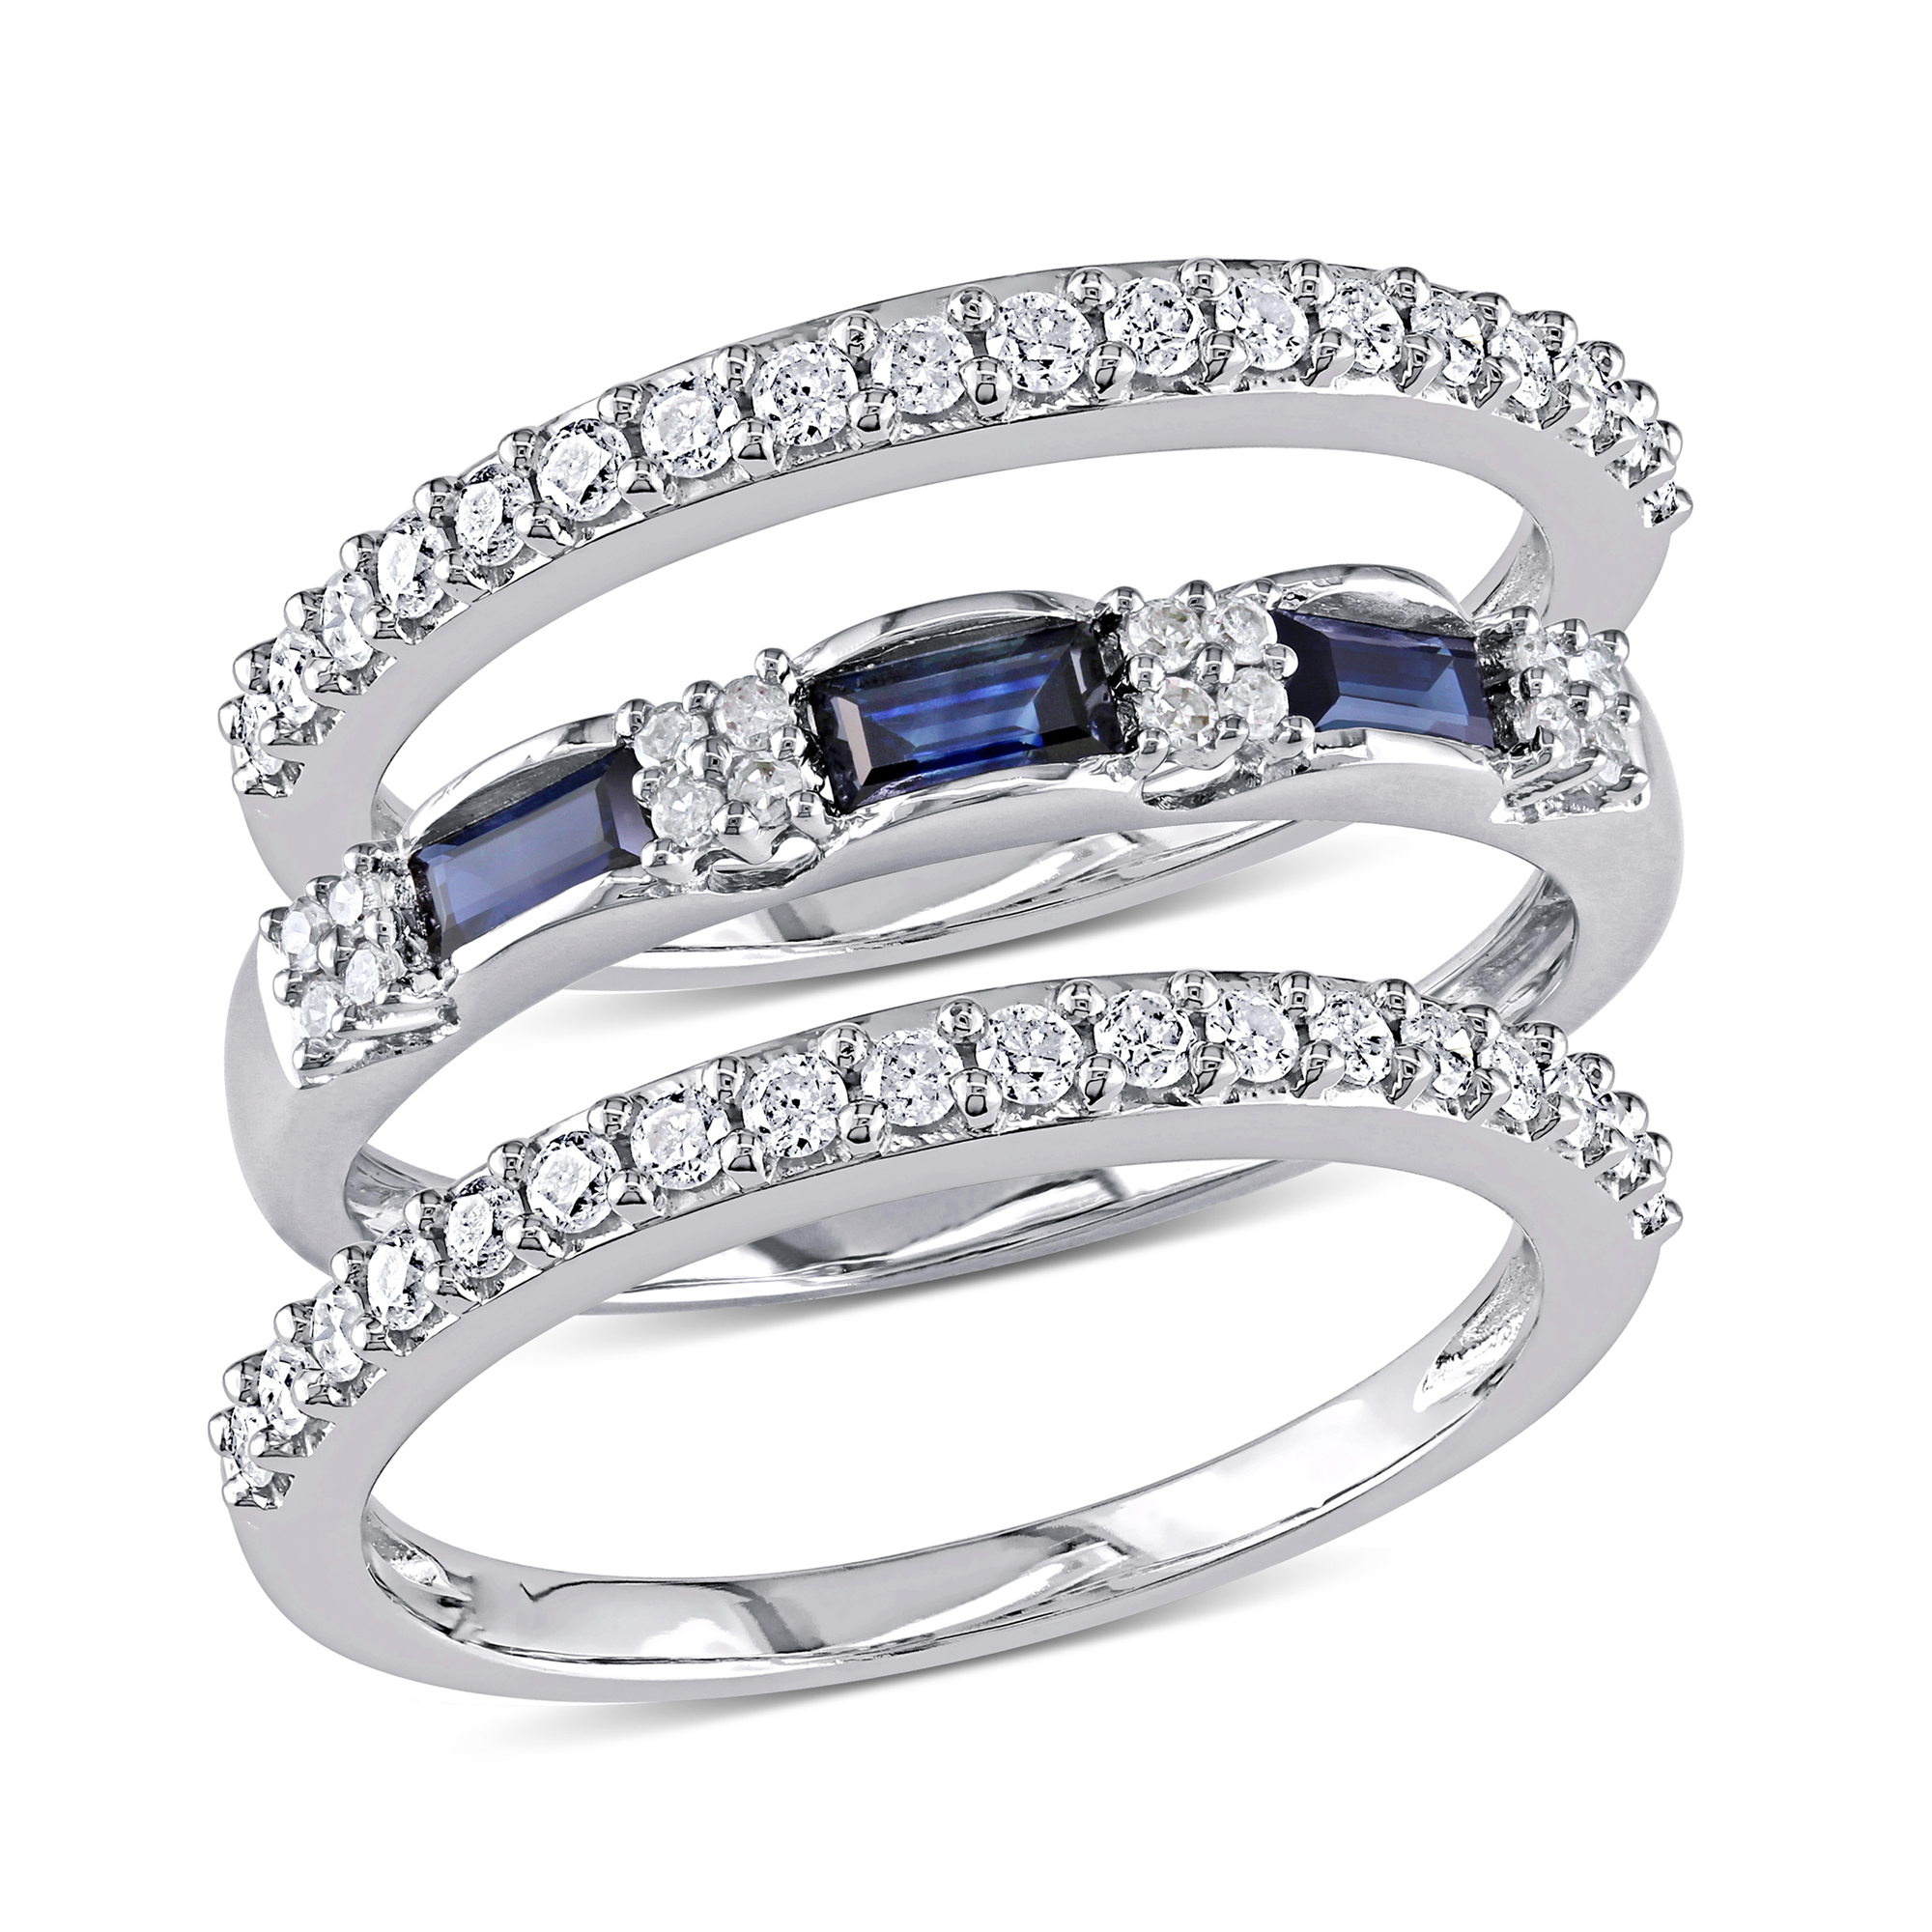 Blue Sapphire and 1/2ctw Diamond White Gold 3-Piece Stackable Ring Set | Size 5.5 -  REEDS, RDJ004796-0550